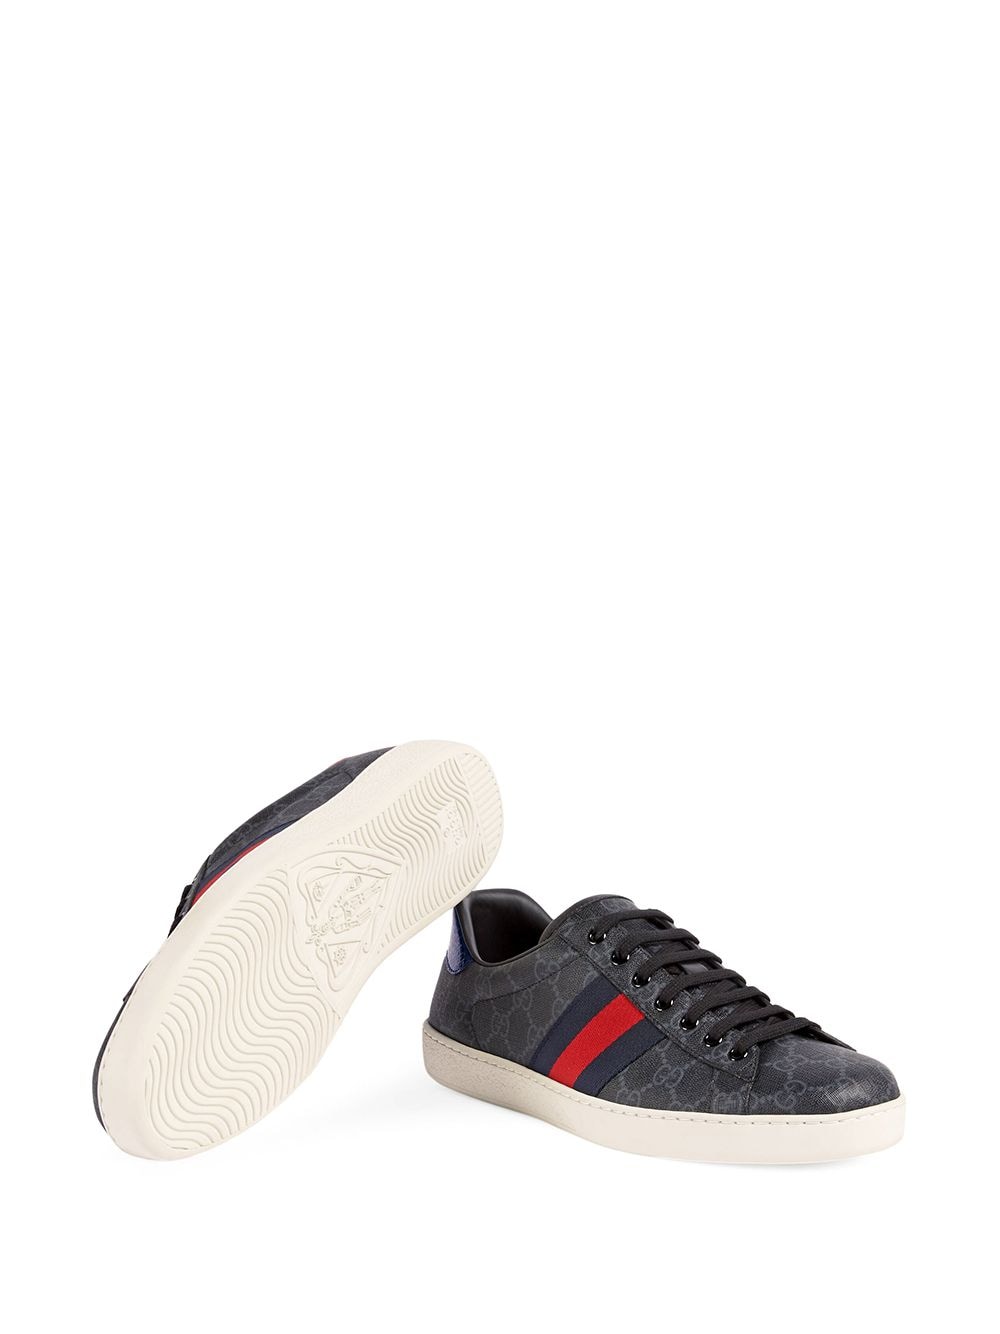 GUCCI Classic Black Canvas Men's Sneakers - Perfect for Any Occasion